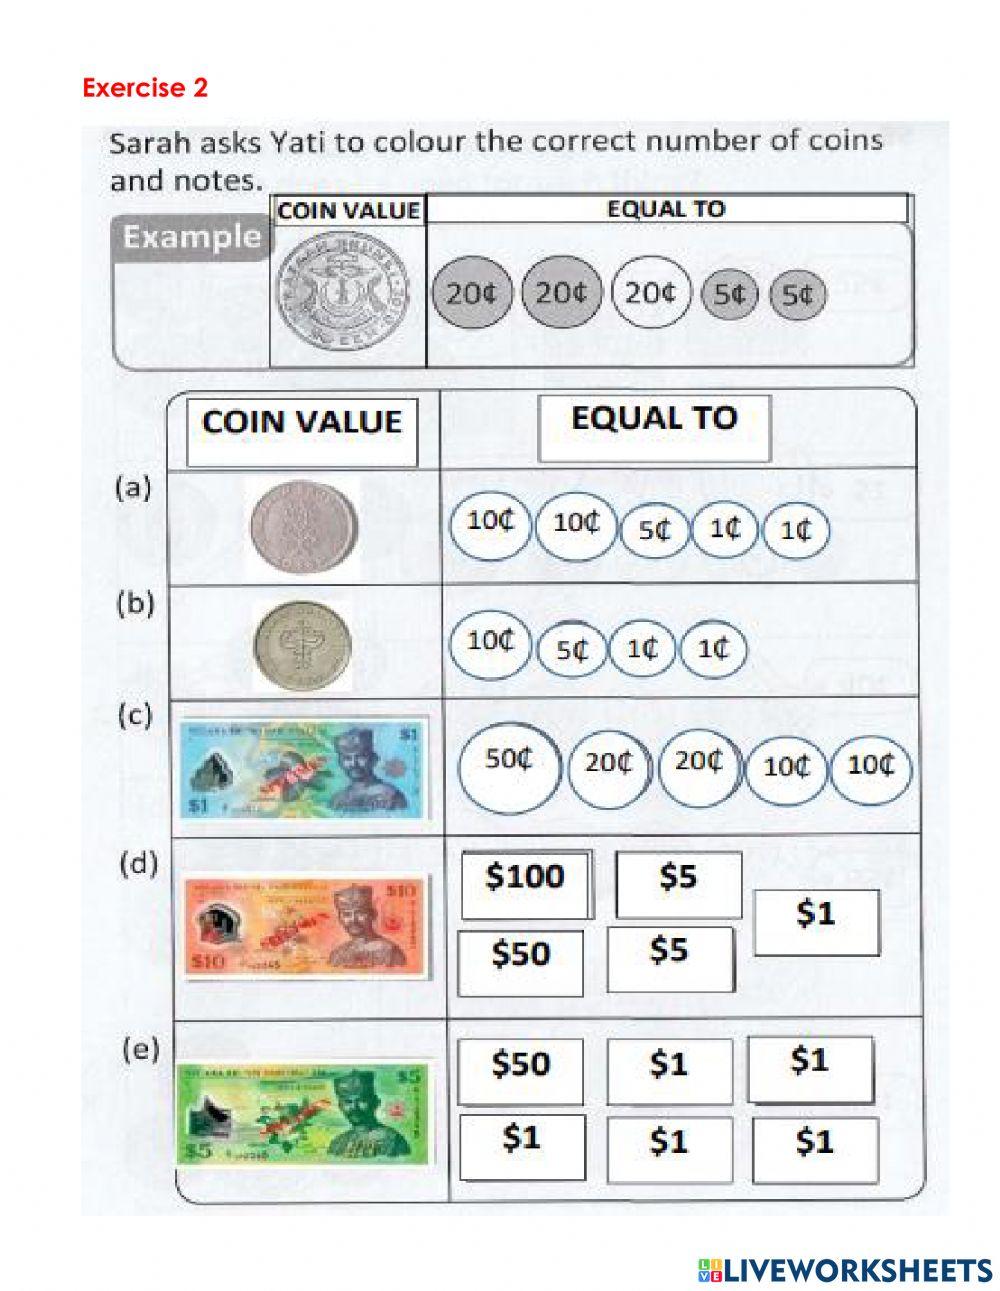 Colour the correct number of coins and notes that make up that money